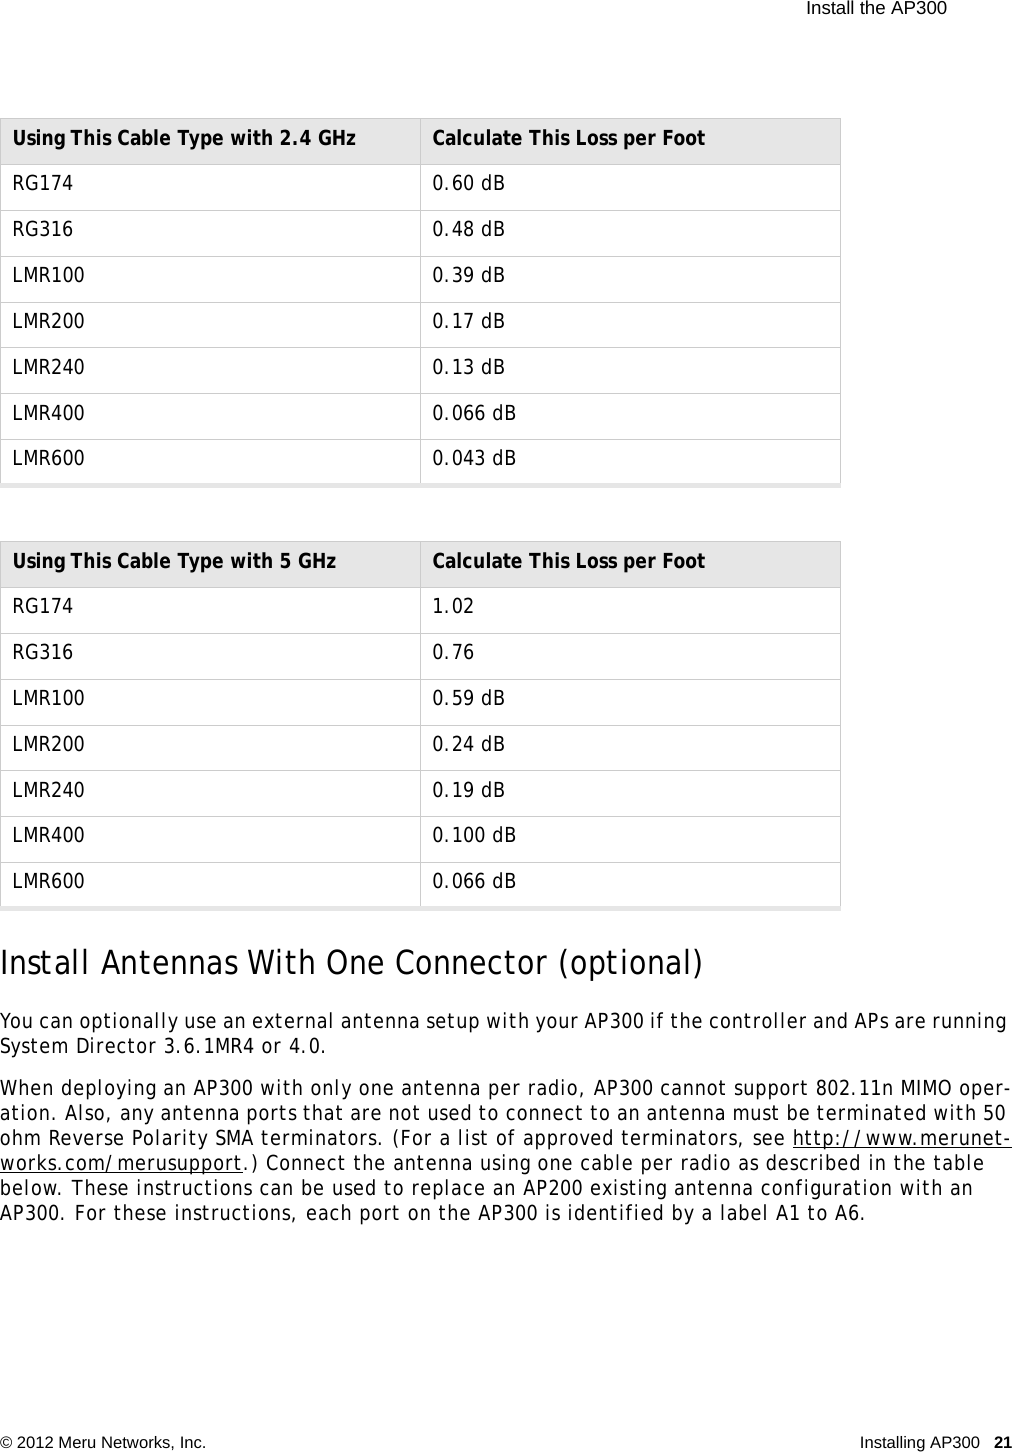  Install the AP300 © 2012 Meru Networks, Inc. Installing AP300 21 Install Antennas With One Connector (optional)You can optionally use an external antenna setup with your AP300 if the controller and APs are running System Director 3.6.1MR4 or 4.0.   When deploying an AP300 with only one antenna per radio, AP300 cannot support 802.11n MIMO oper-ation. Also, any antenna ports that are not used to connect to an antenna must be terminated with 50 ohm Reverse Polarity SMA terminators. (For a list of approved terminators, see http://www.merunet-works.com/merusupport.) Connect the antenna using one cable per radio as described in the table below. These instructions can be used to replace an AP200 existing antenna configuration with an AP300. For these instructions, each port on the AP300 is identified by a label A1 to A6.Using This Cable Type with 2.4 GHz Calculate This Loss per FootRG174 0.60 dBRG316 0.48 dBLMR100 0.39 dBLMR200 0.17 dBLMR240 0.13 dBLMR400 0.066 dBLMR600 0.043 dBUsing This Cable Type with 5 GHz Calculate This Loss per FootRG174 1.02RG316 0.76LMR100 0.59 dBLMR200 0.24 dBLMR240 0.19 dBLMR400 0.100 dBLMR600 0.066 dB